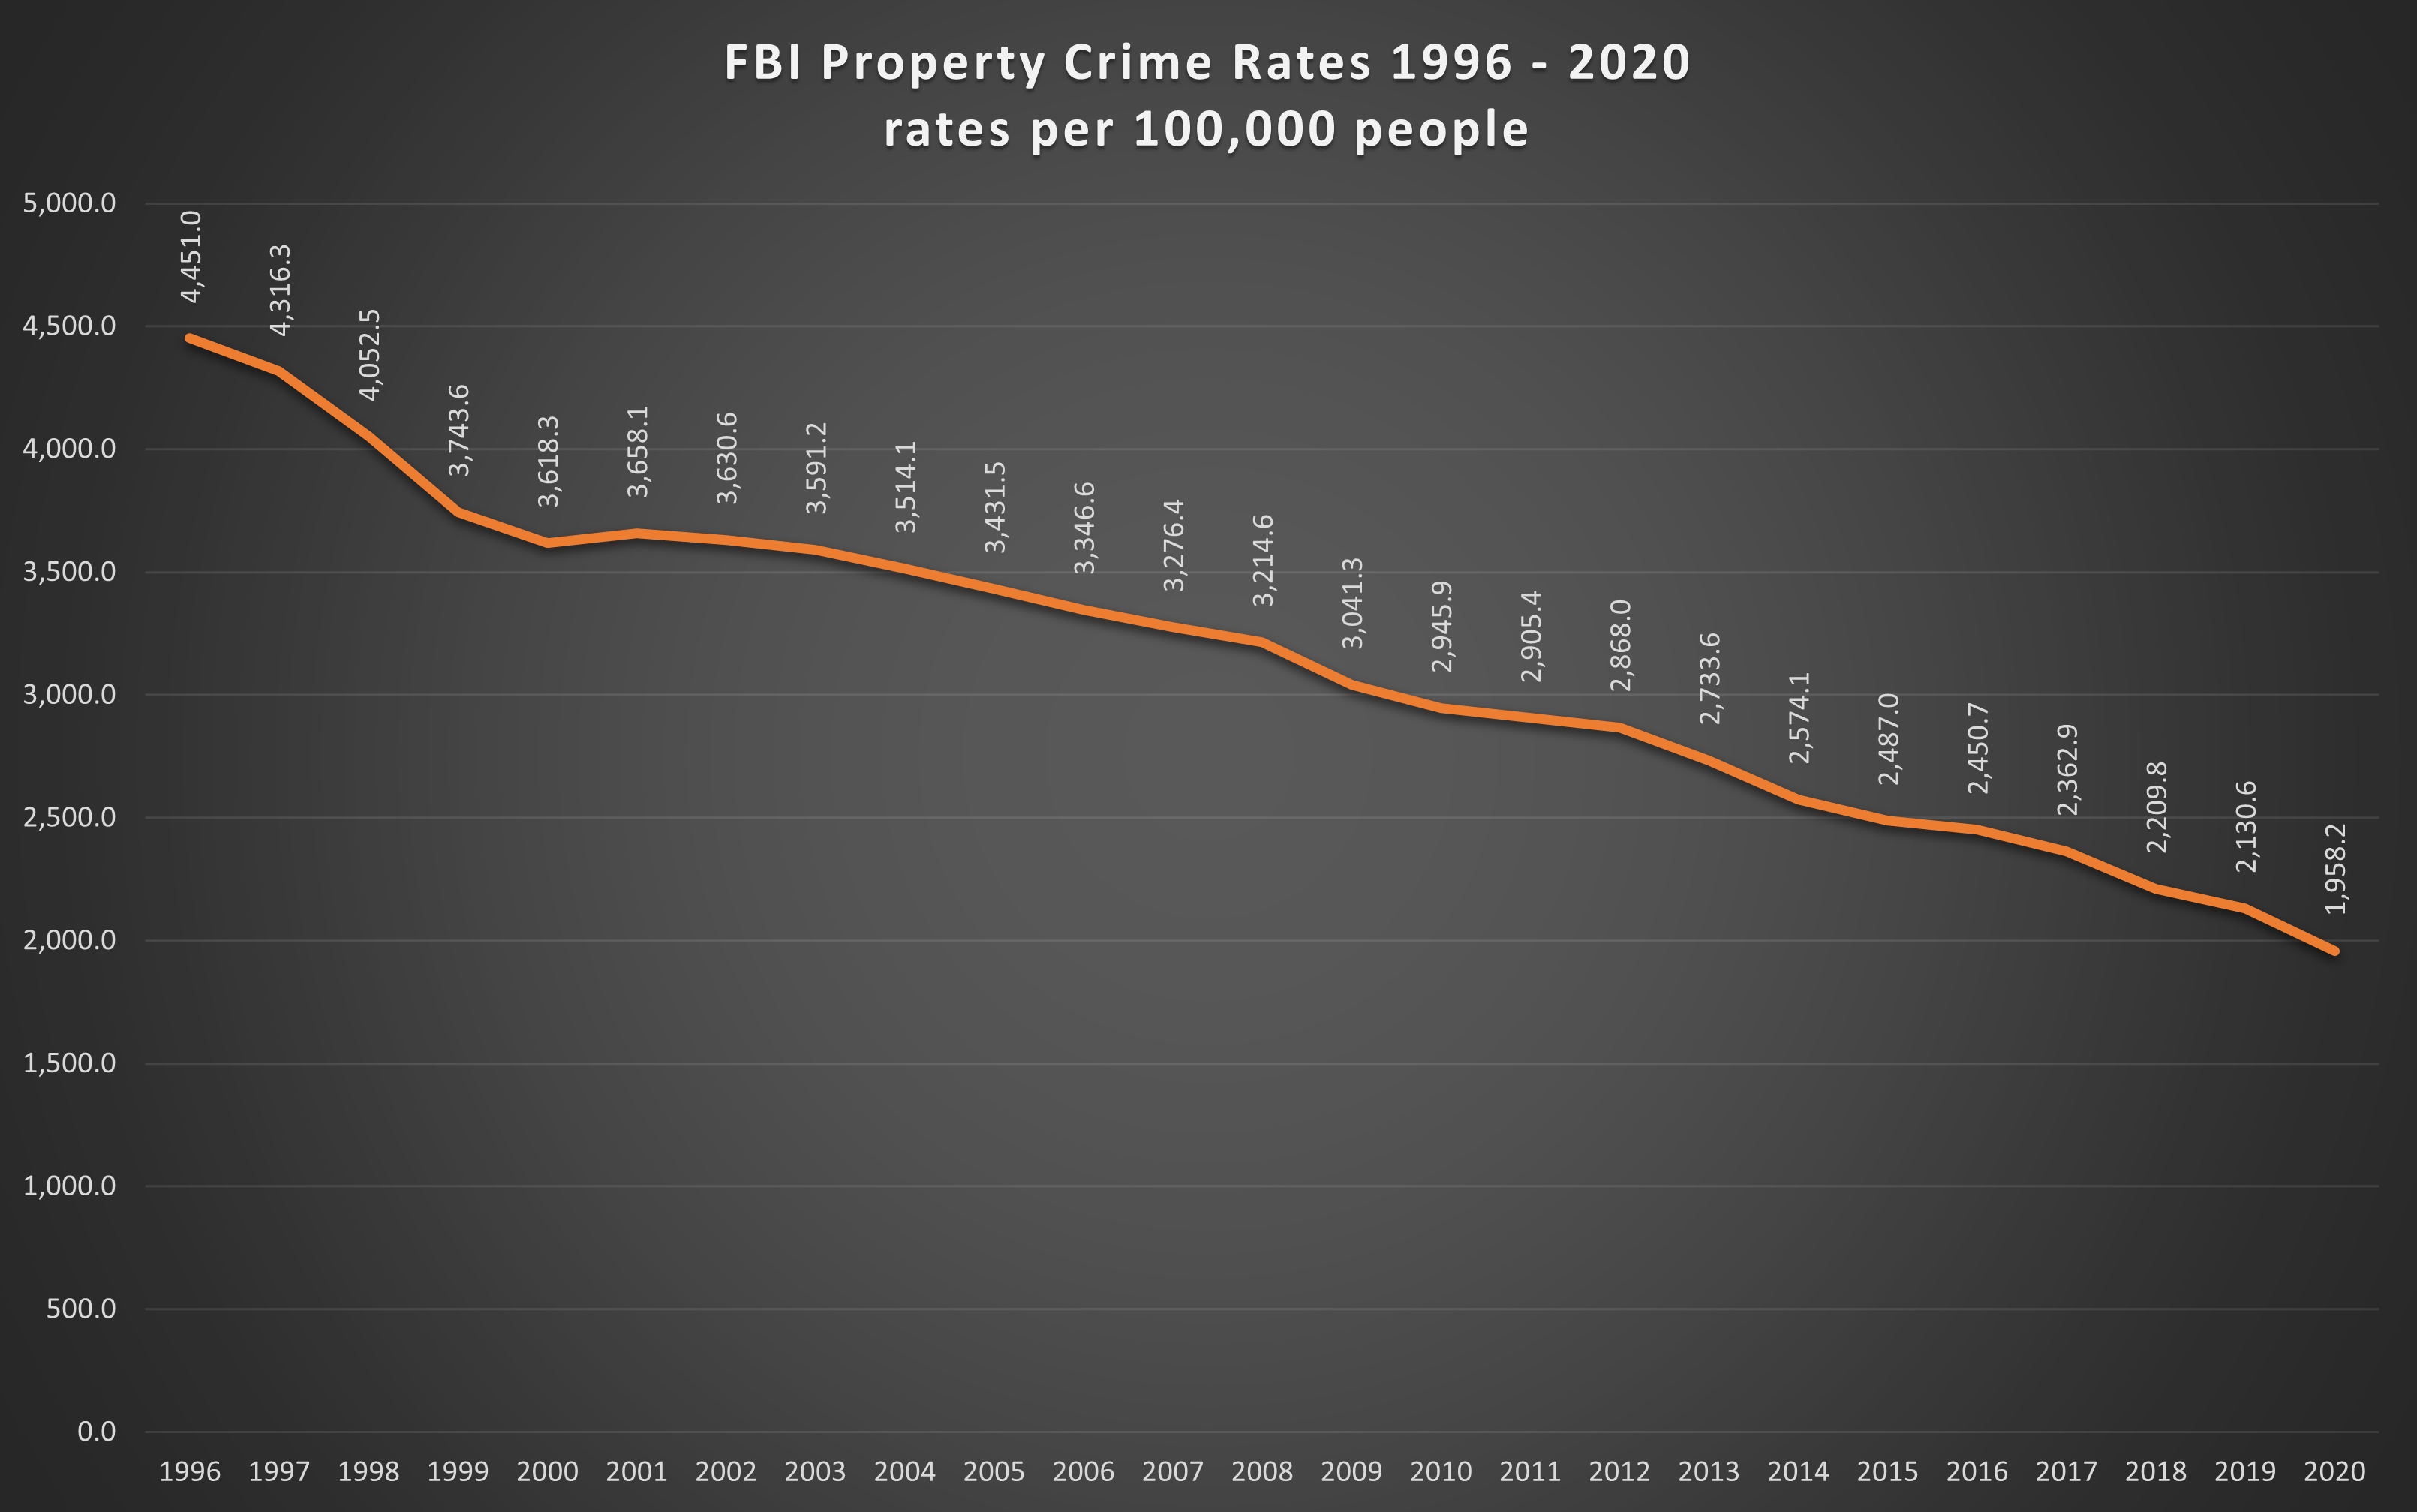 Property crime in the U.S. is down